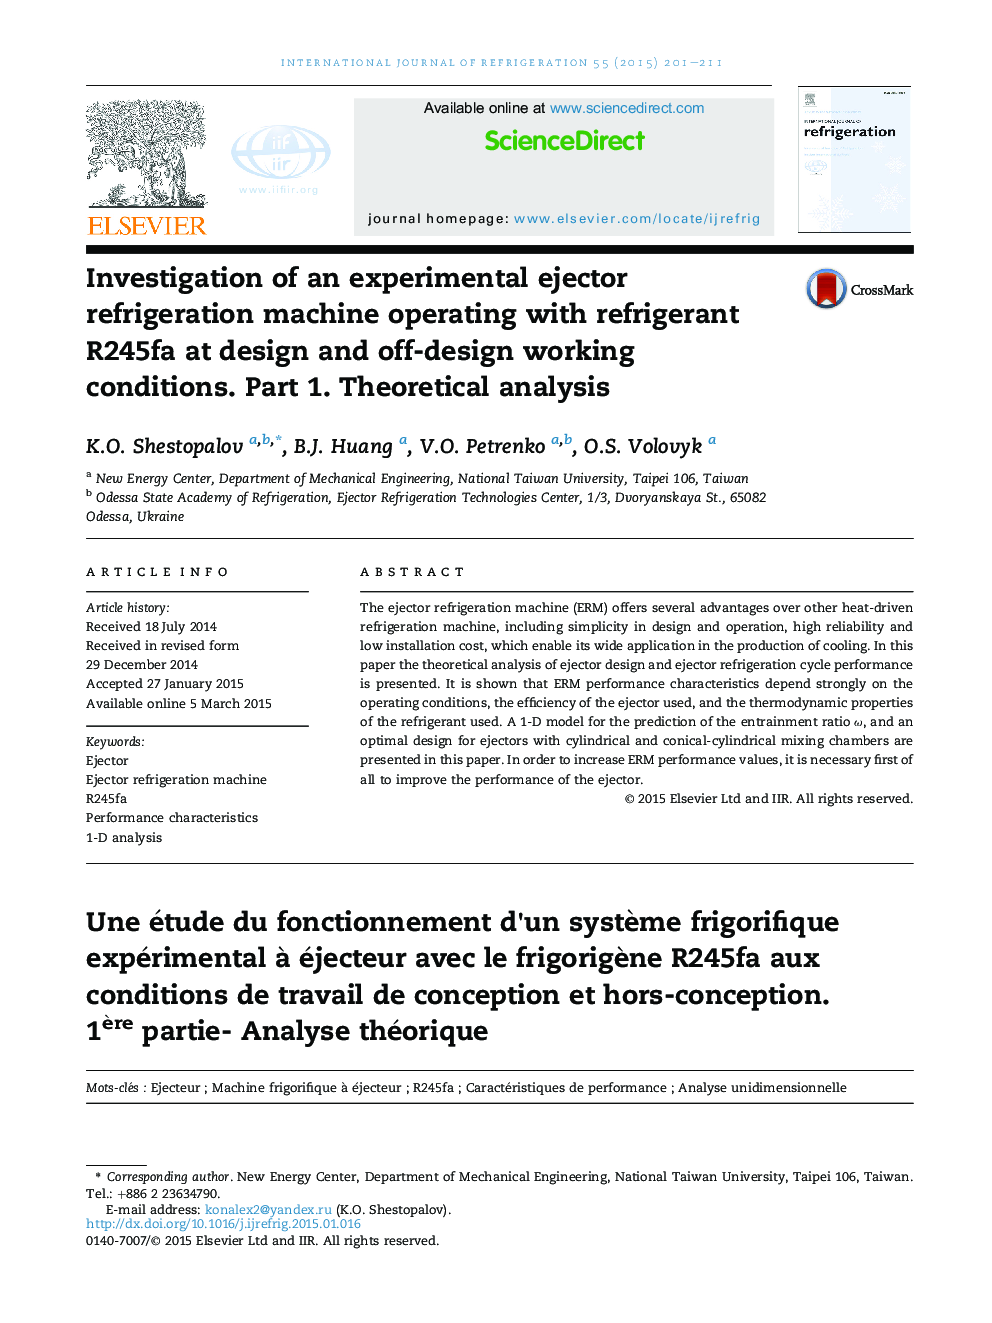 Investigation of an experimental ejector refrigeration machine operating with refrigerant R245fa at design and off-design working conditions. Part 1. Theoretical analysis